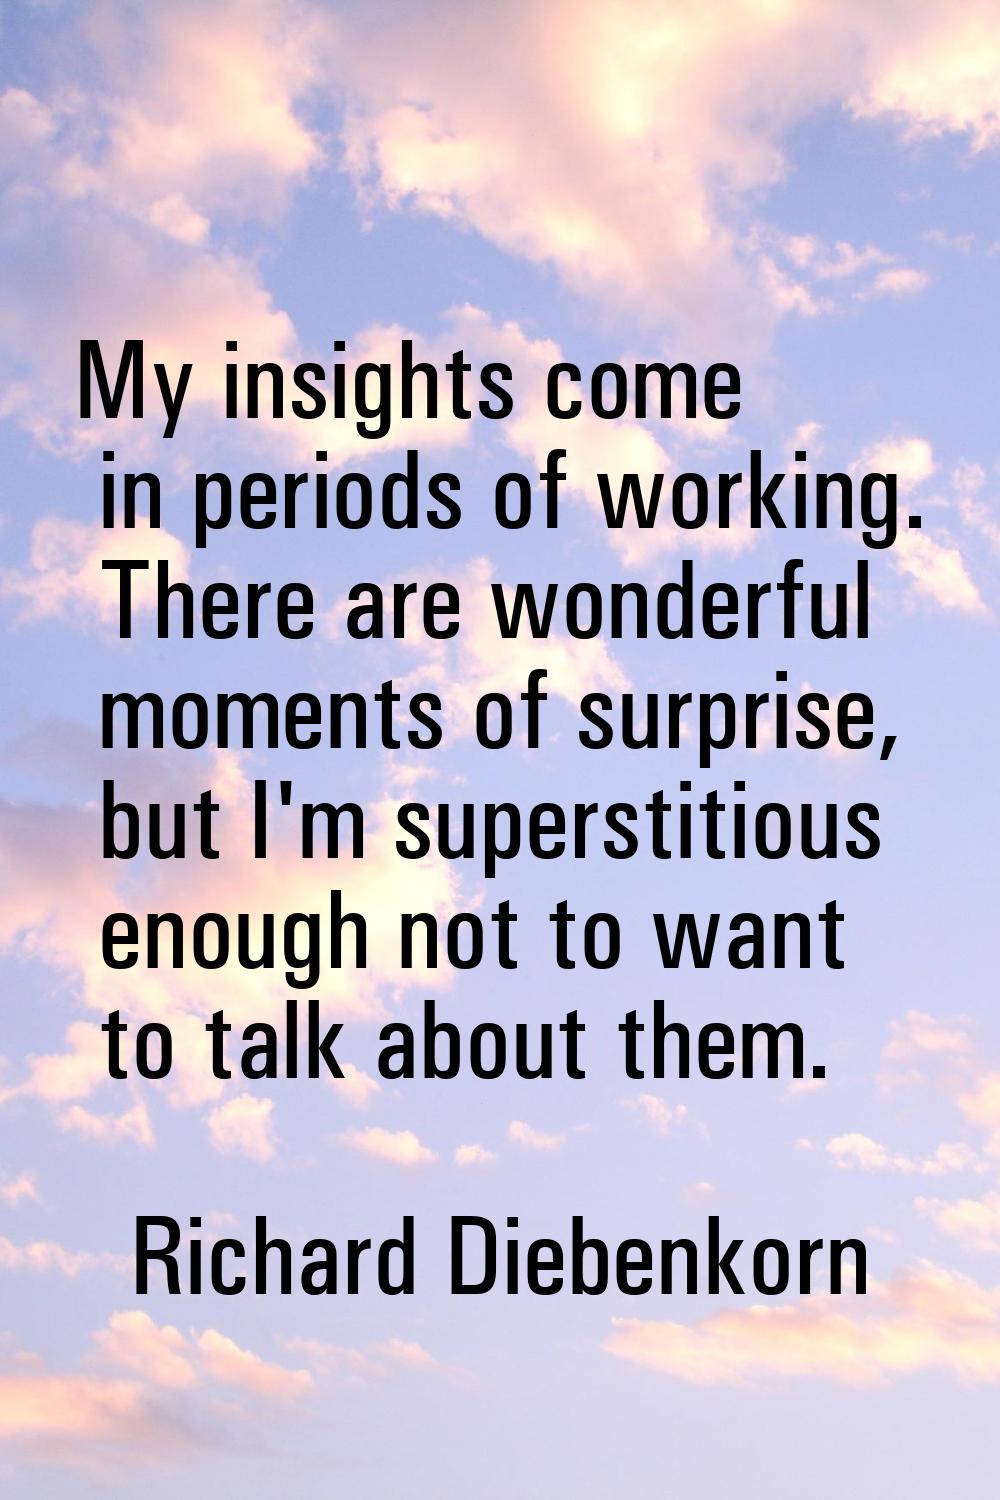 My insights come in periods of working. There are wonderful moments of surprise, but I'm superstiti